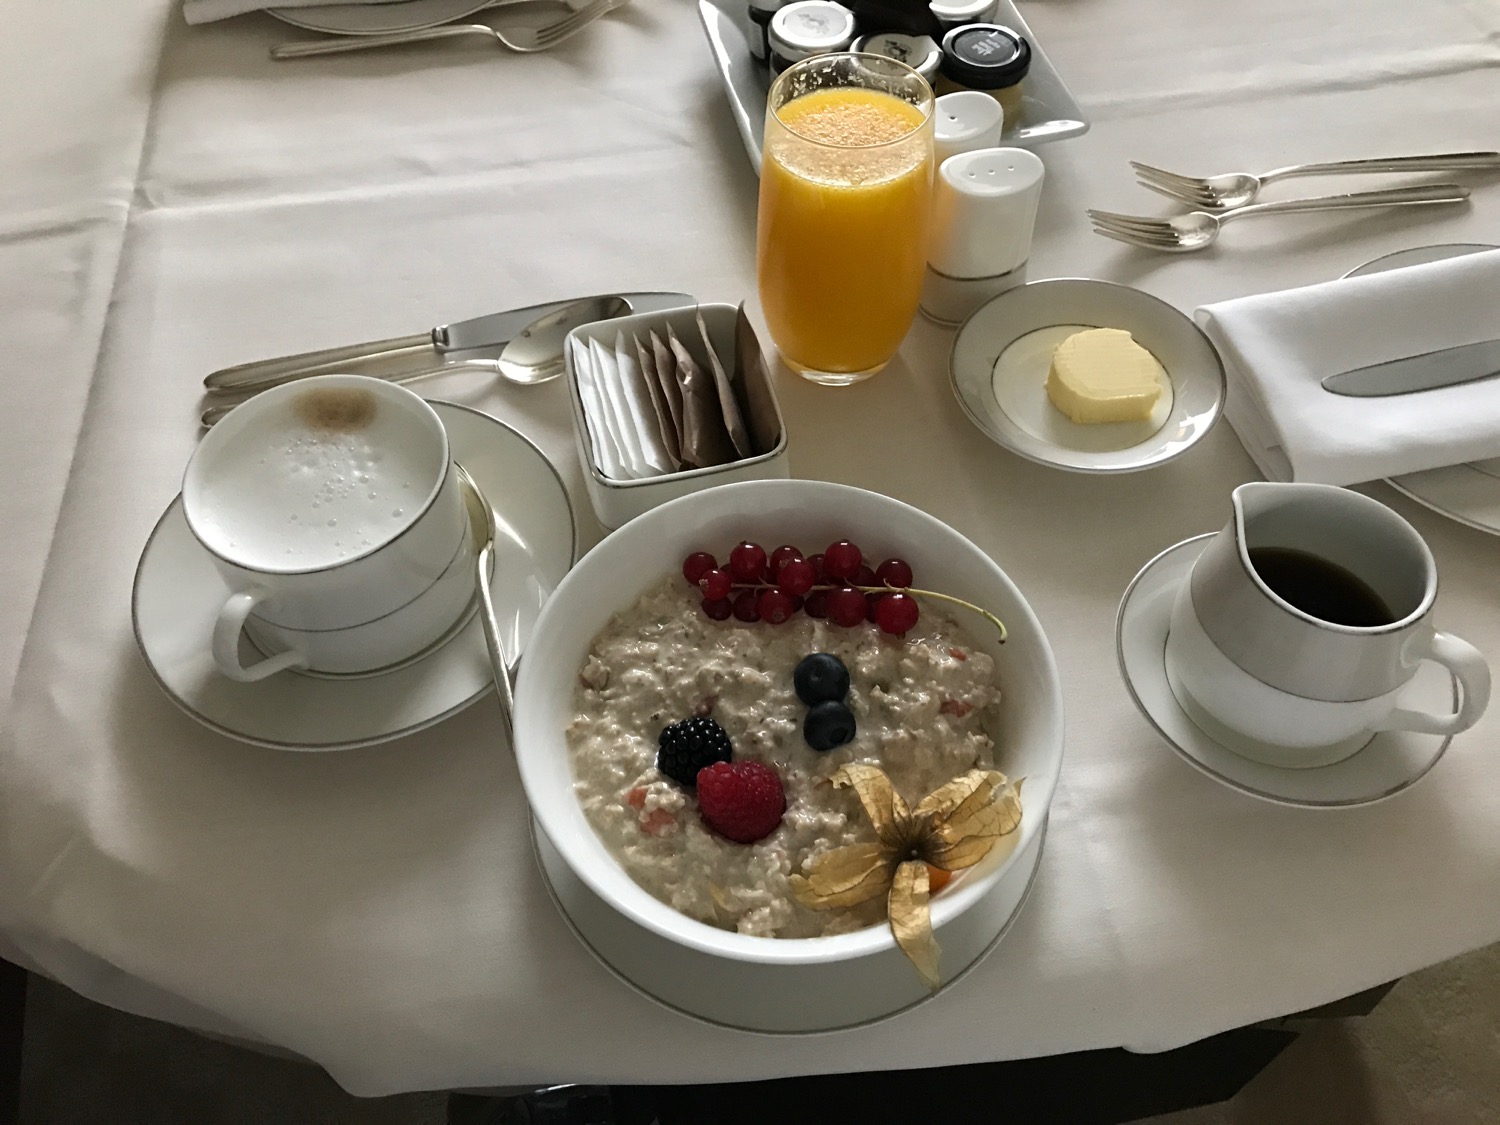 a bowl of oatmeal with berries and a glass of juice